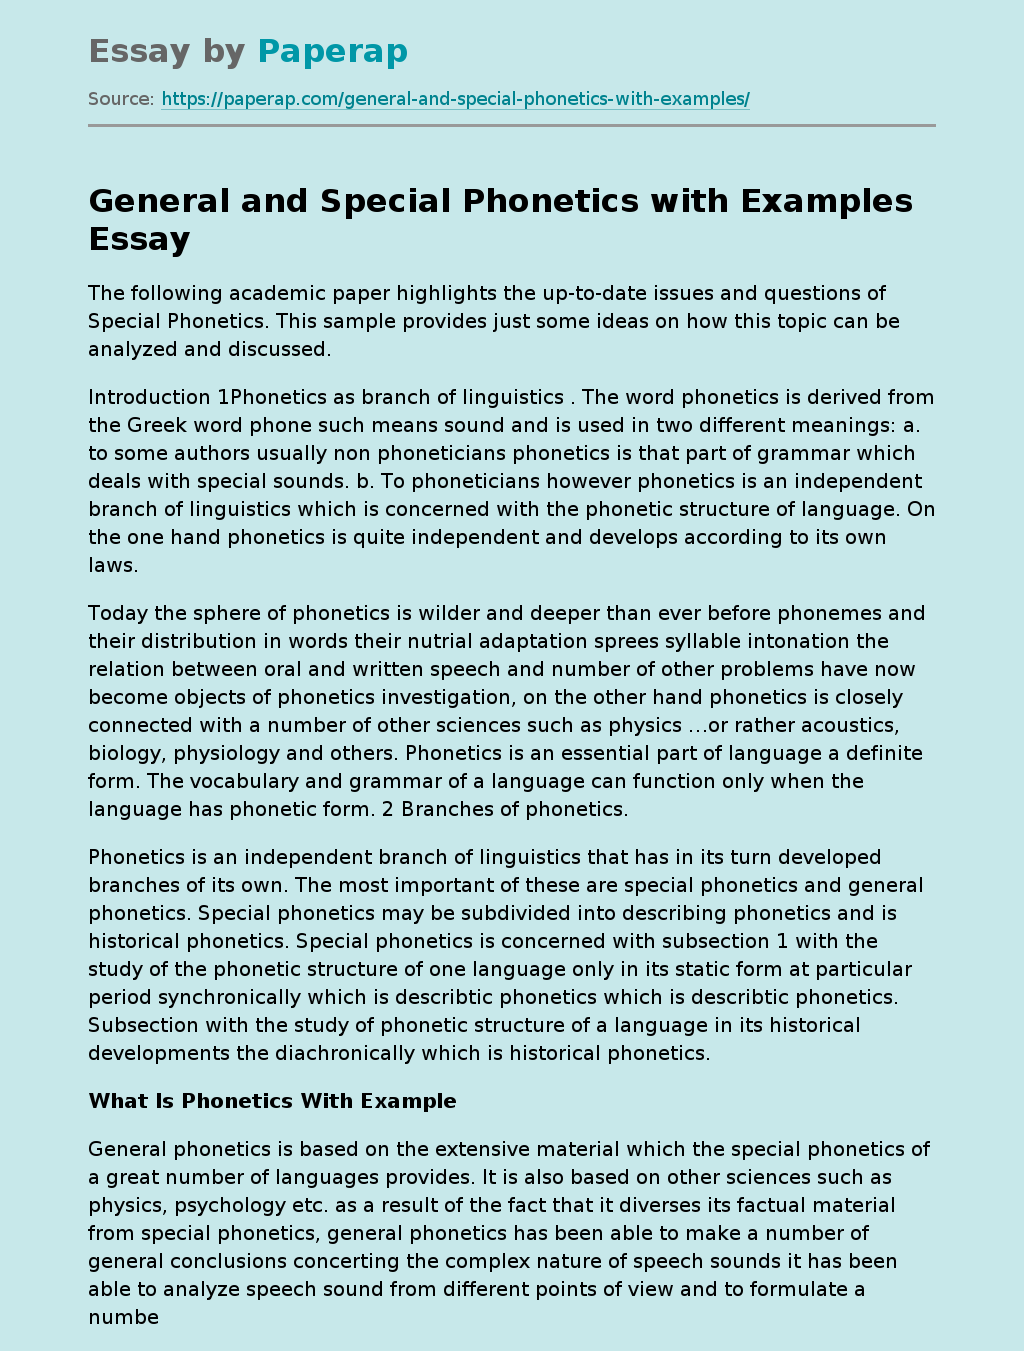 General and Special Phonetics with Examples